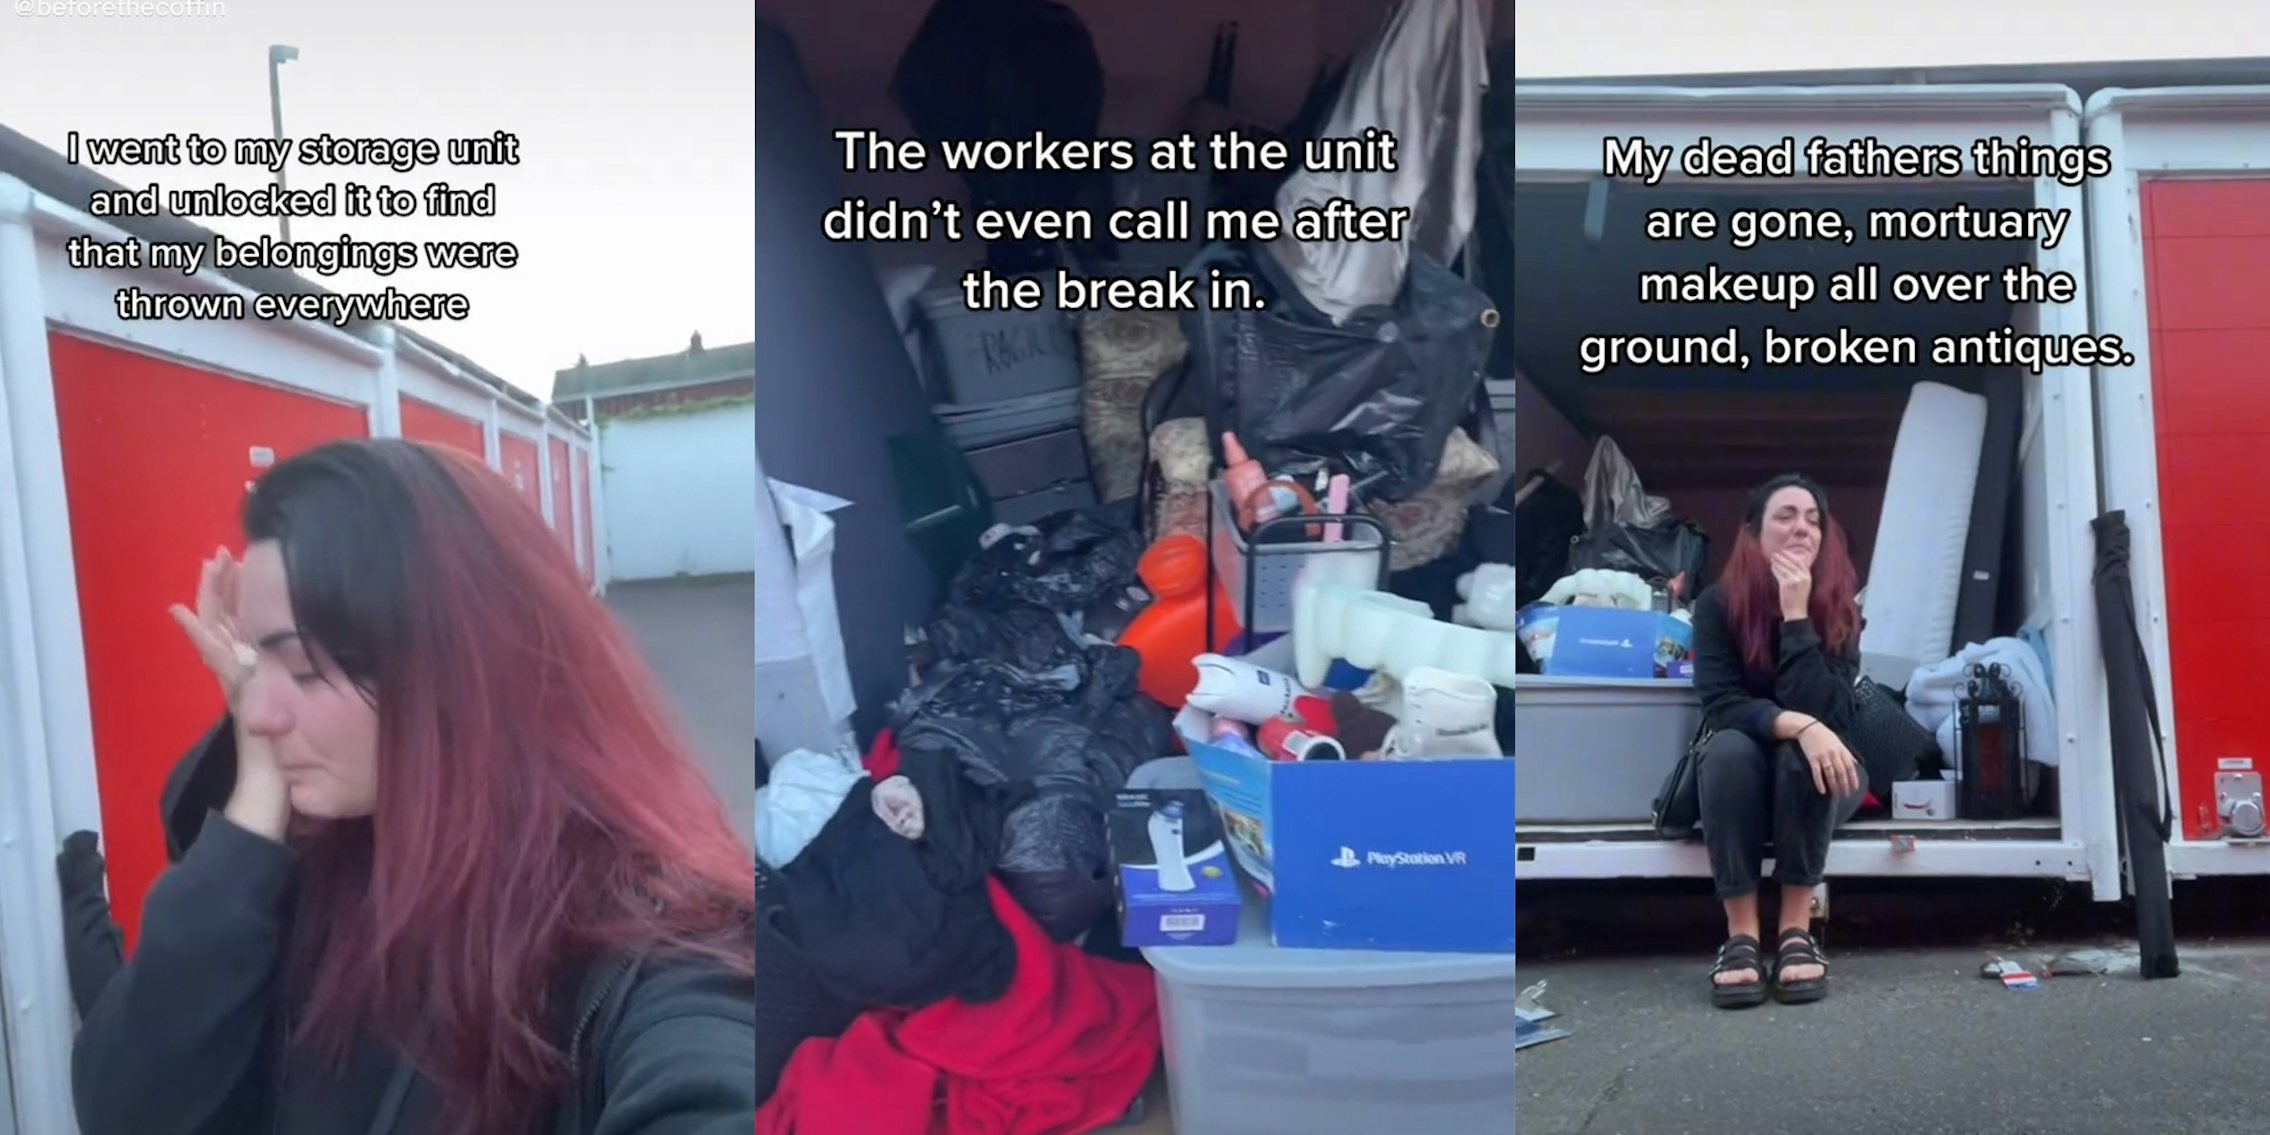 woman crying in front of storage unit with captions 'I went to my storage unit and unlocked it to find that my belongings were thrown everywhere', 'The workers at the unit didn't even call me after the break in', 'My dead fathers things are gone, mortuary makeup all oer the ground, broken antiques.'